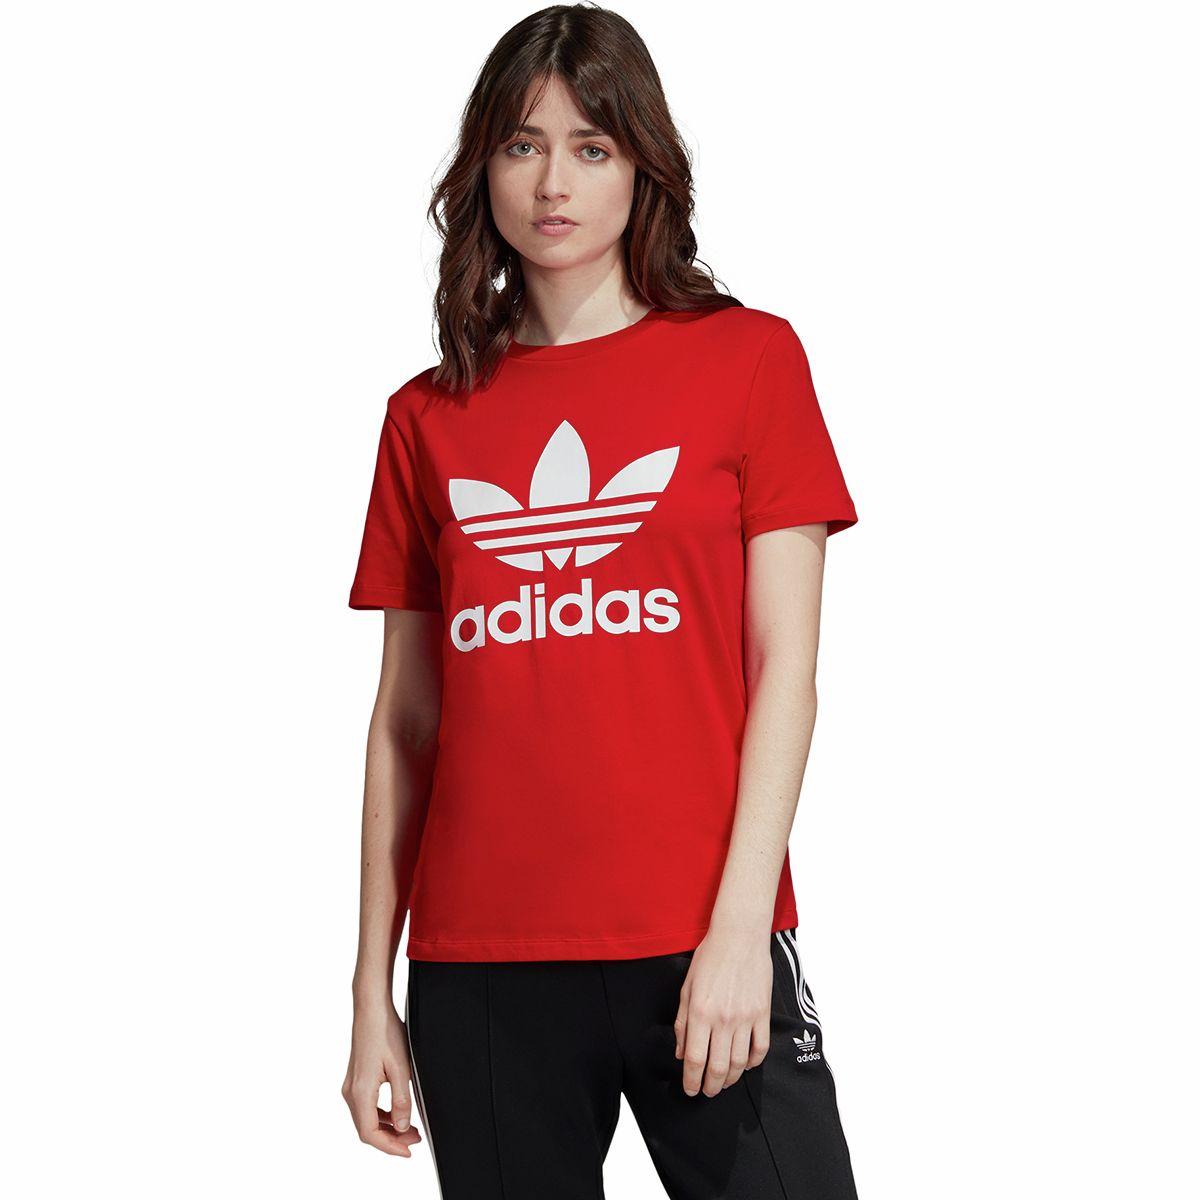 adidas Cotton Trefoil T-shirt in Scarlet (Red) - Lyst